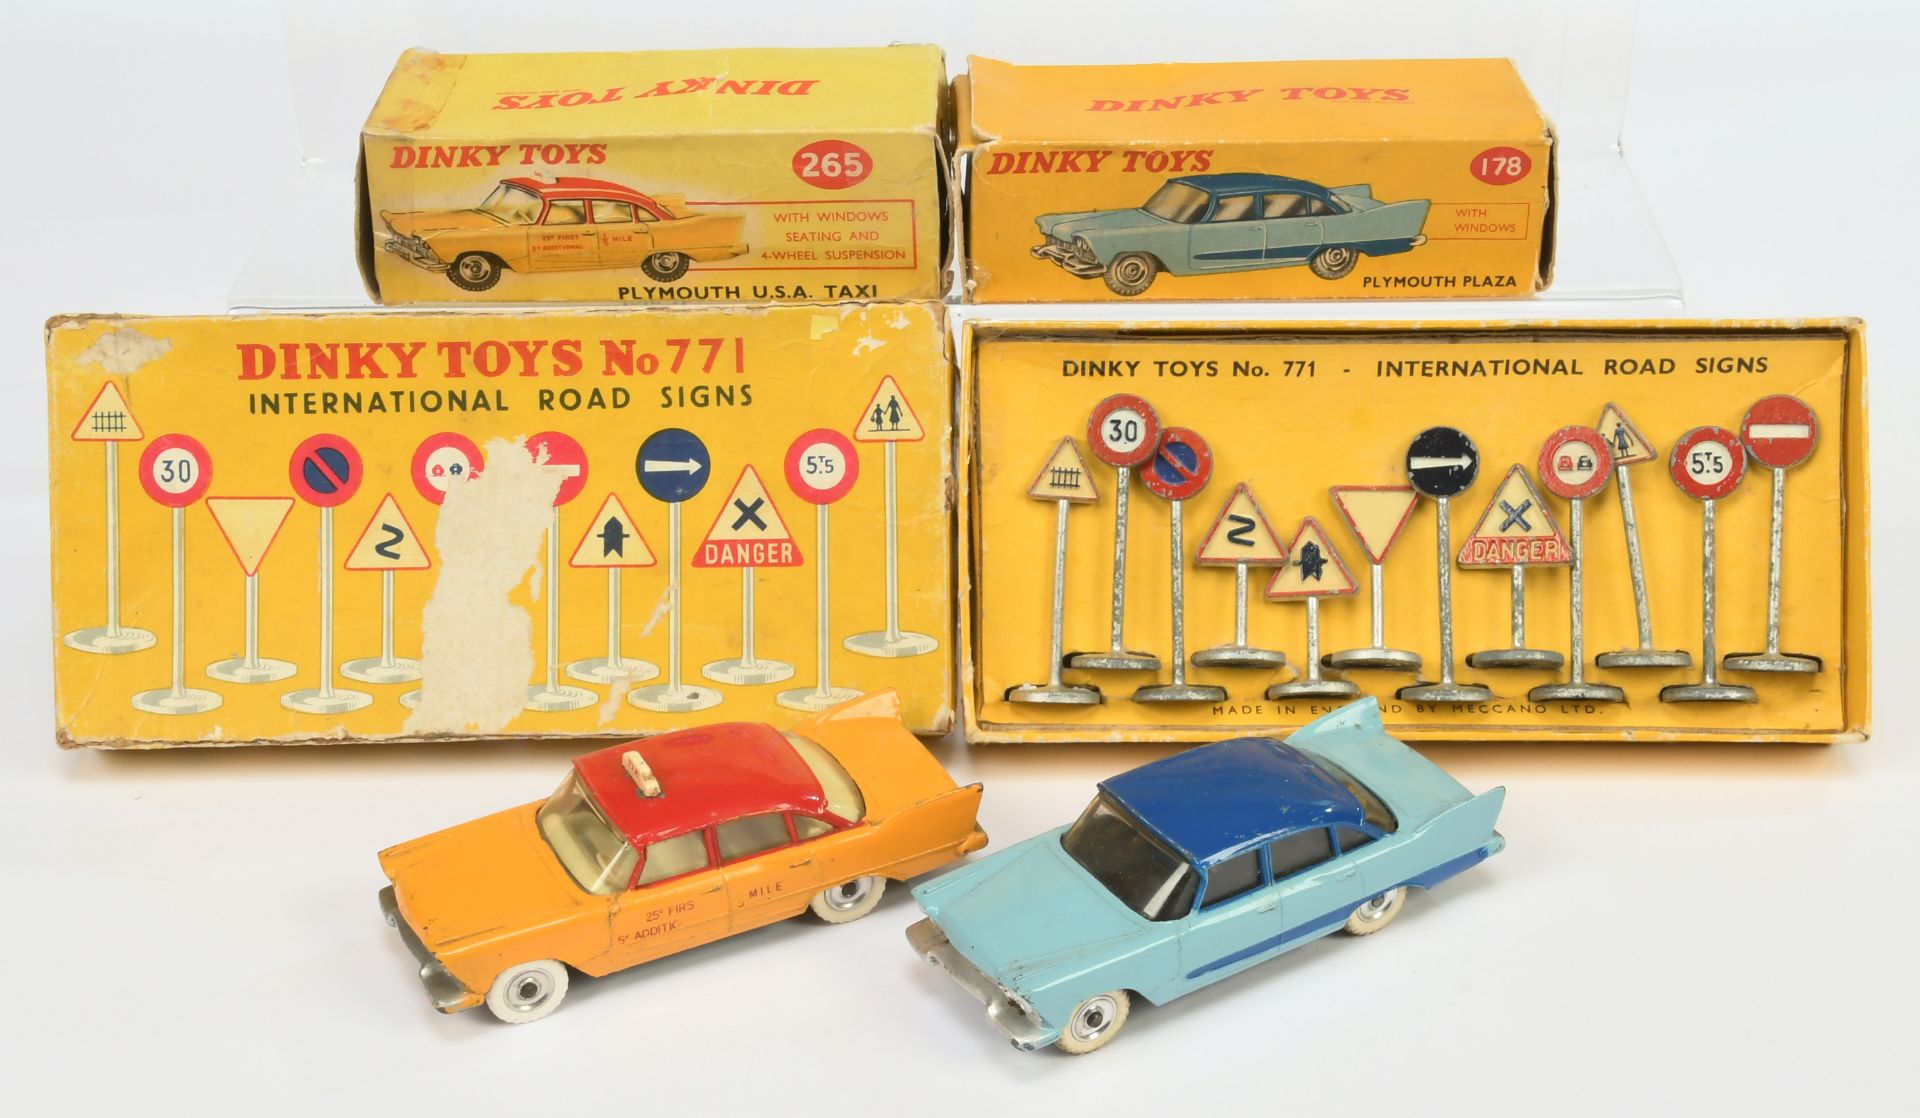 Dinky Toys Group To Include - (1) 178 Plymouth Plaza - Two-Tone blue, (2) Another 265 "Taxi" - Ye...